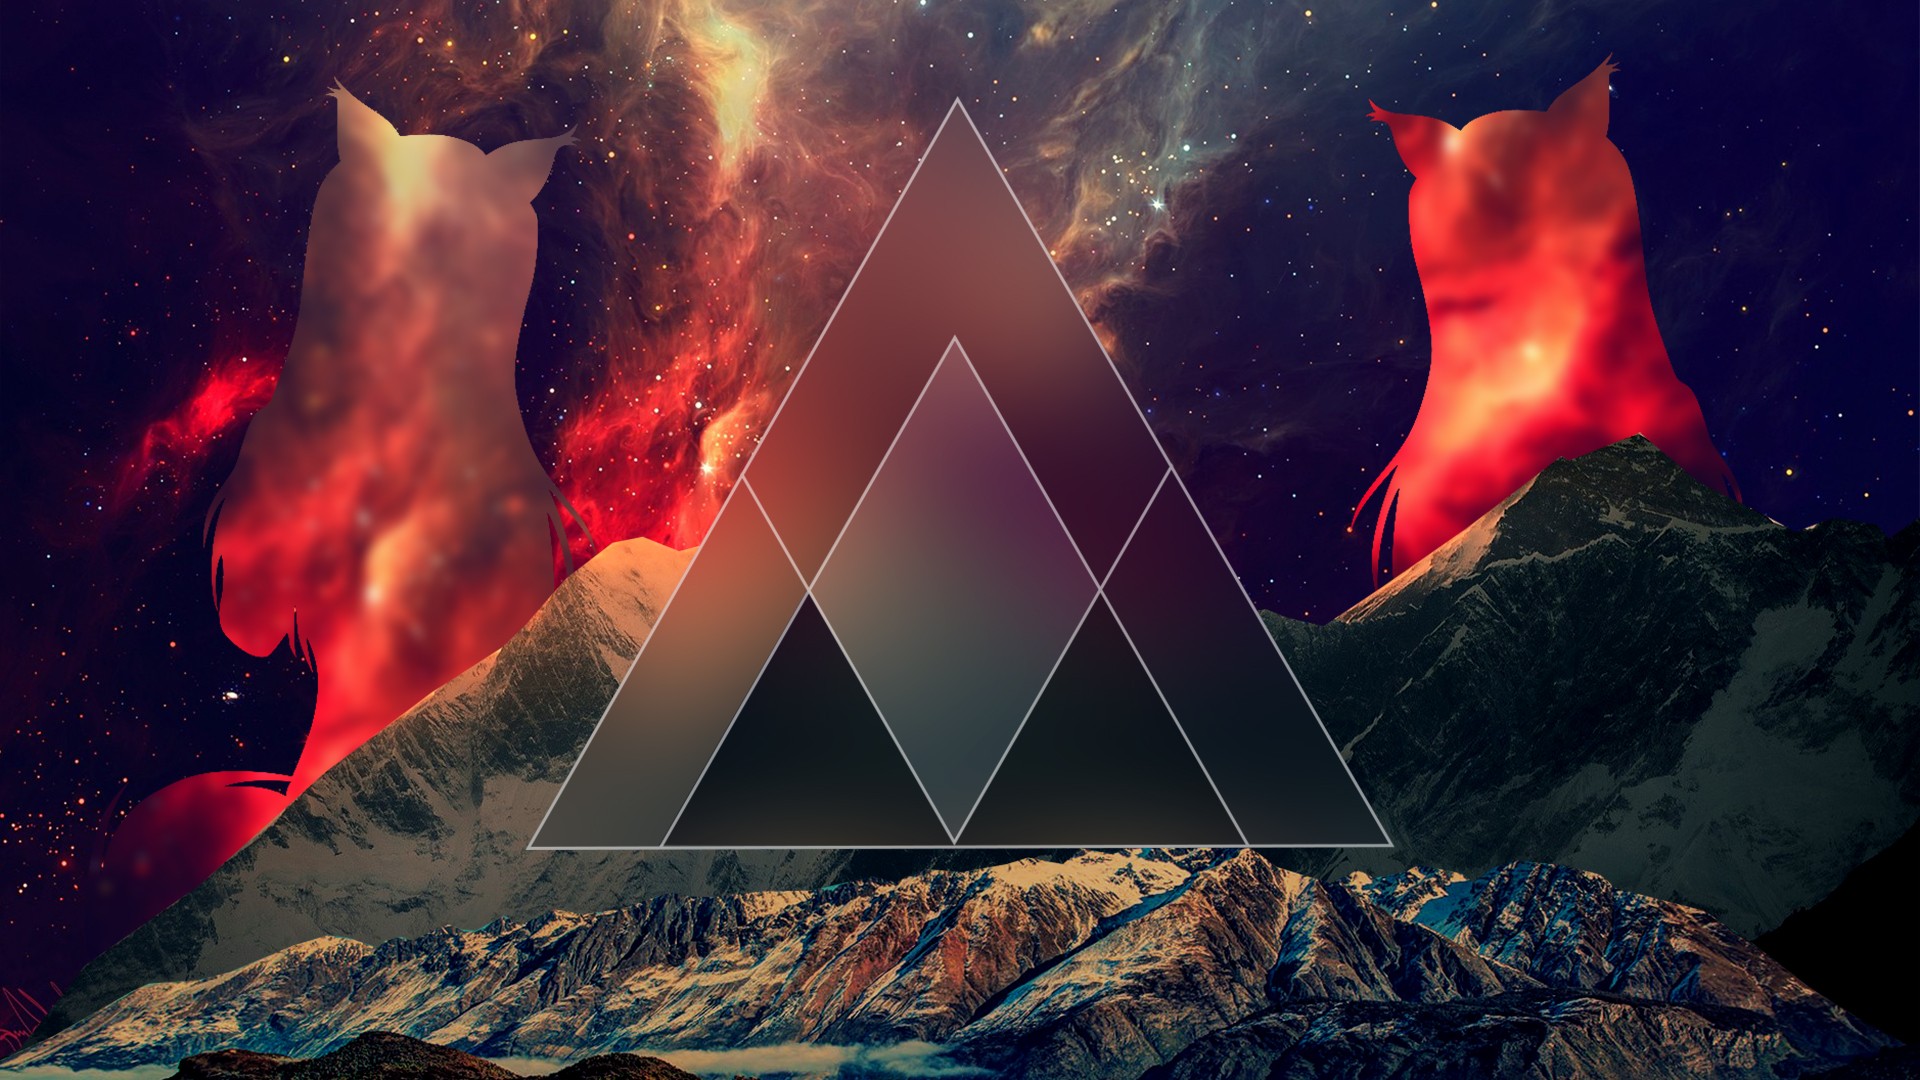 General 1920x1080 landscape stars nebula mountains abstract triangle geometric figures